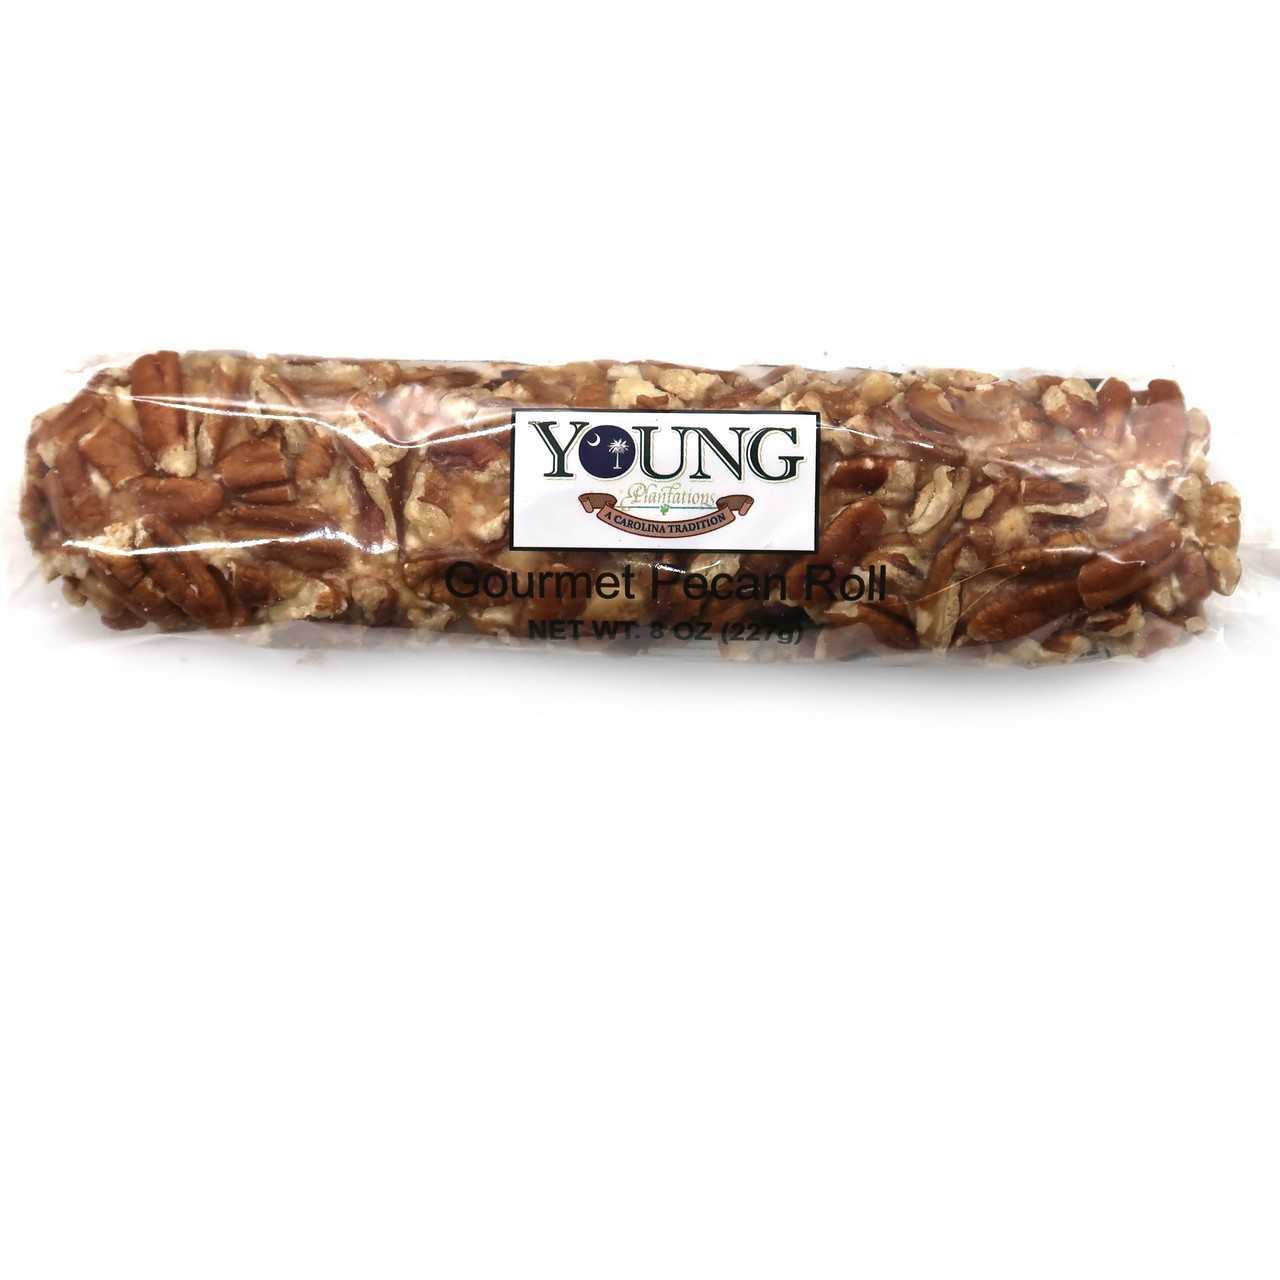 https://cdn11.bigcommerce.com/s-36vh87glm0/images/stencil/1280x1280/products/15776/33678/Young-Plantations-Pecan-Log-Roll-8-oz_23139__62690.1693430604.jpg?c=1?imbypass=on